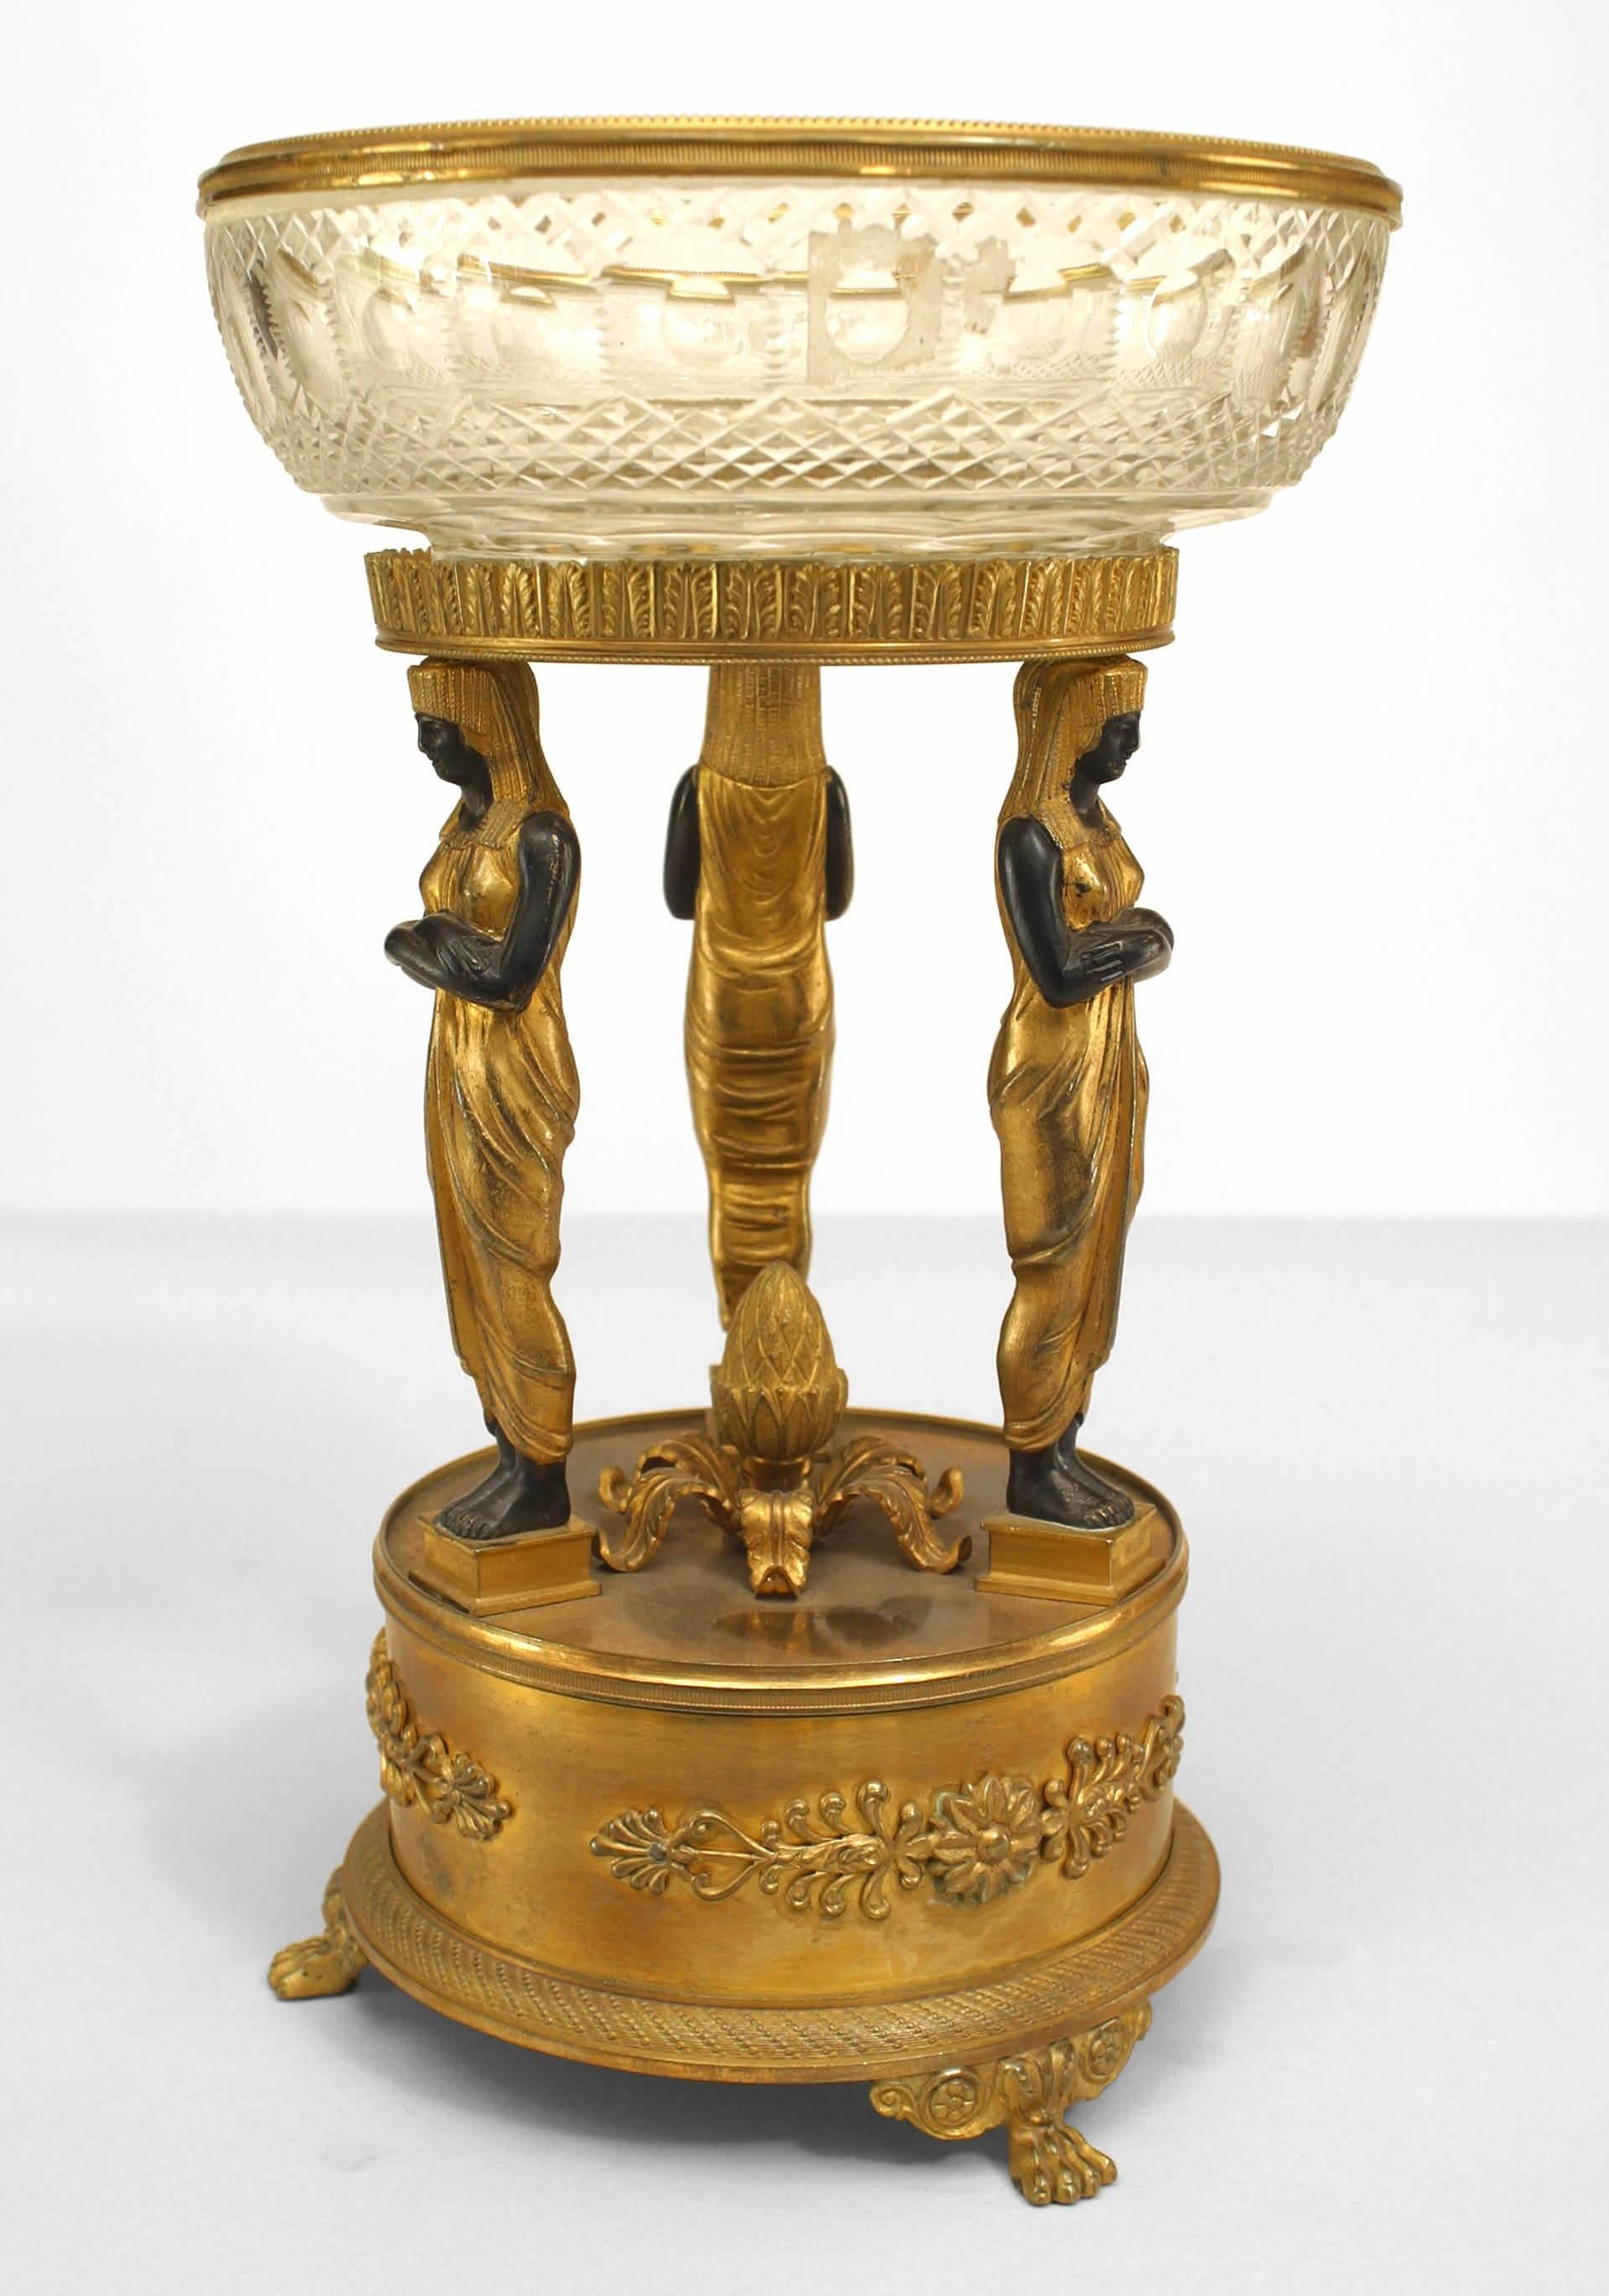 French Empire-style (19th Century) bronze dore compote with 3 Egyptian ebonized figures and crystal bowl.
